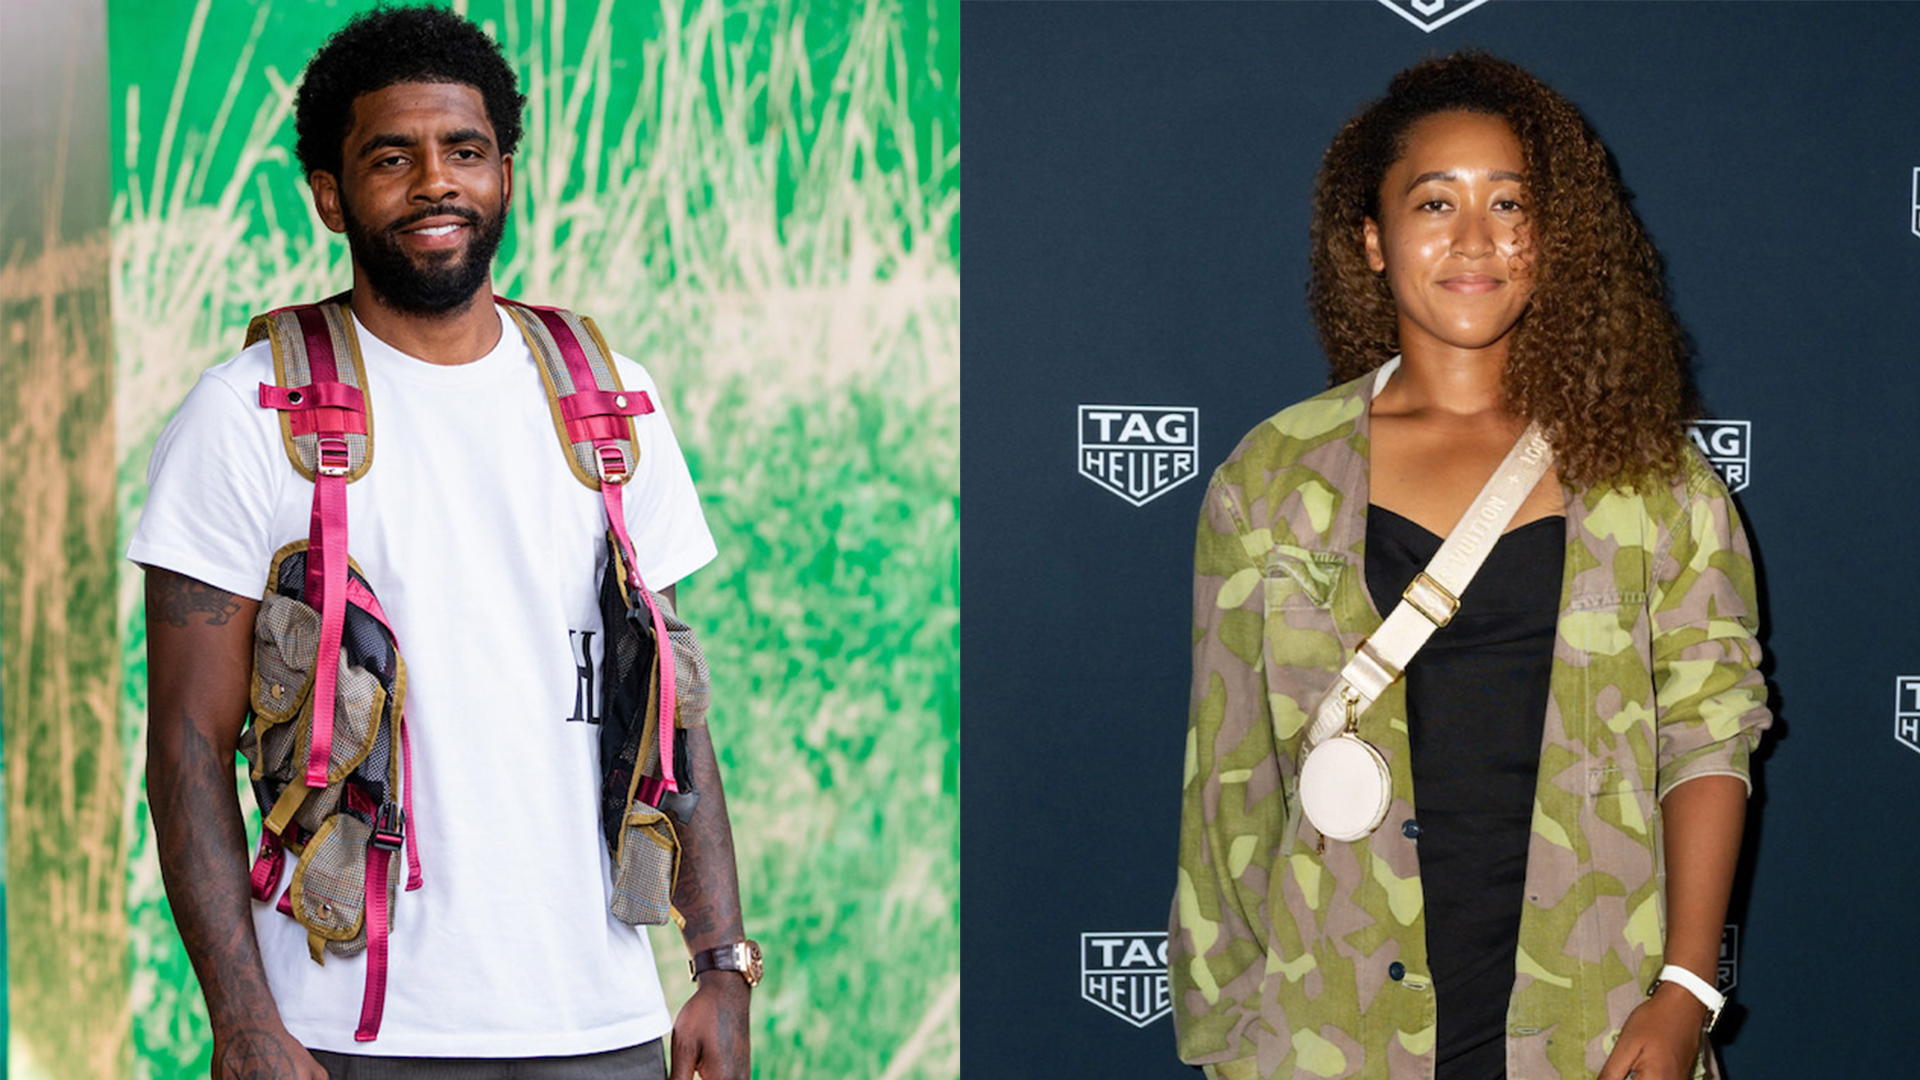 'Y'all Got Room Over At Your Agency For Hoopers' — Naomi Osaka Replies To Kyrie Irving's Inquiry About Her Evolve Sports Agency